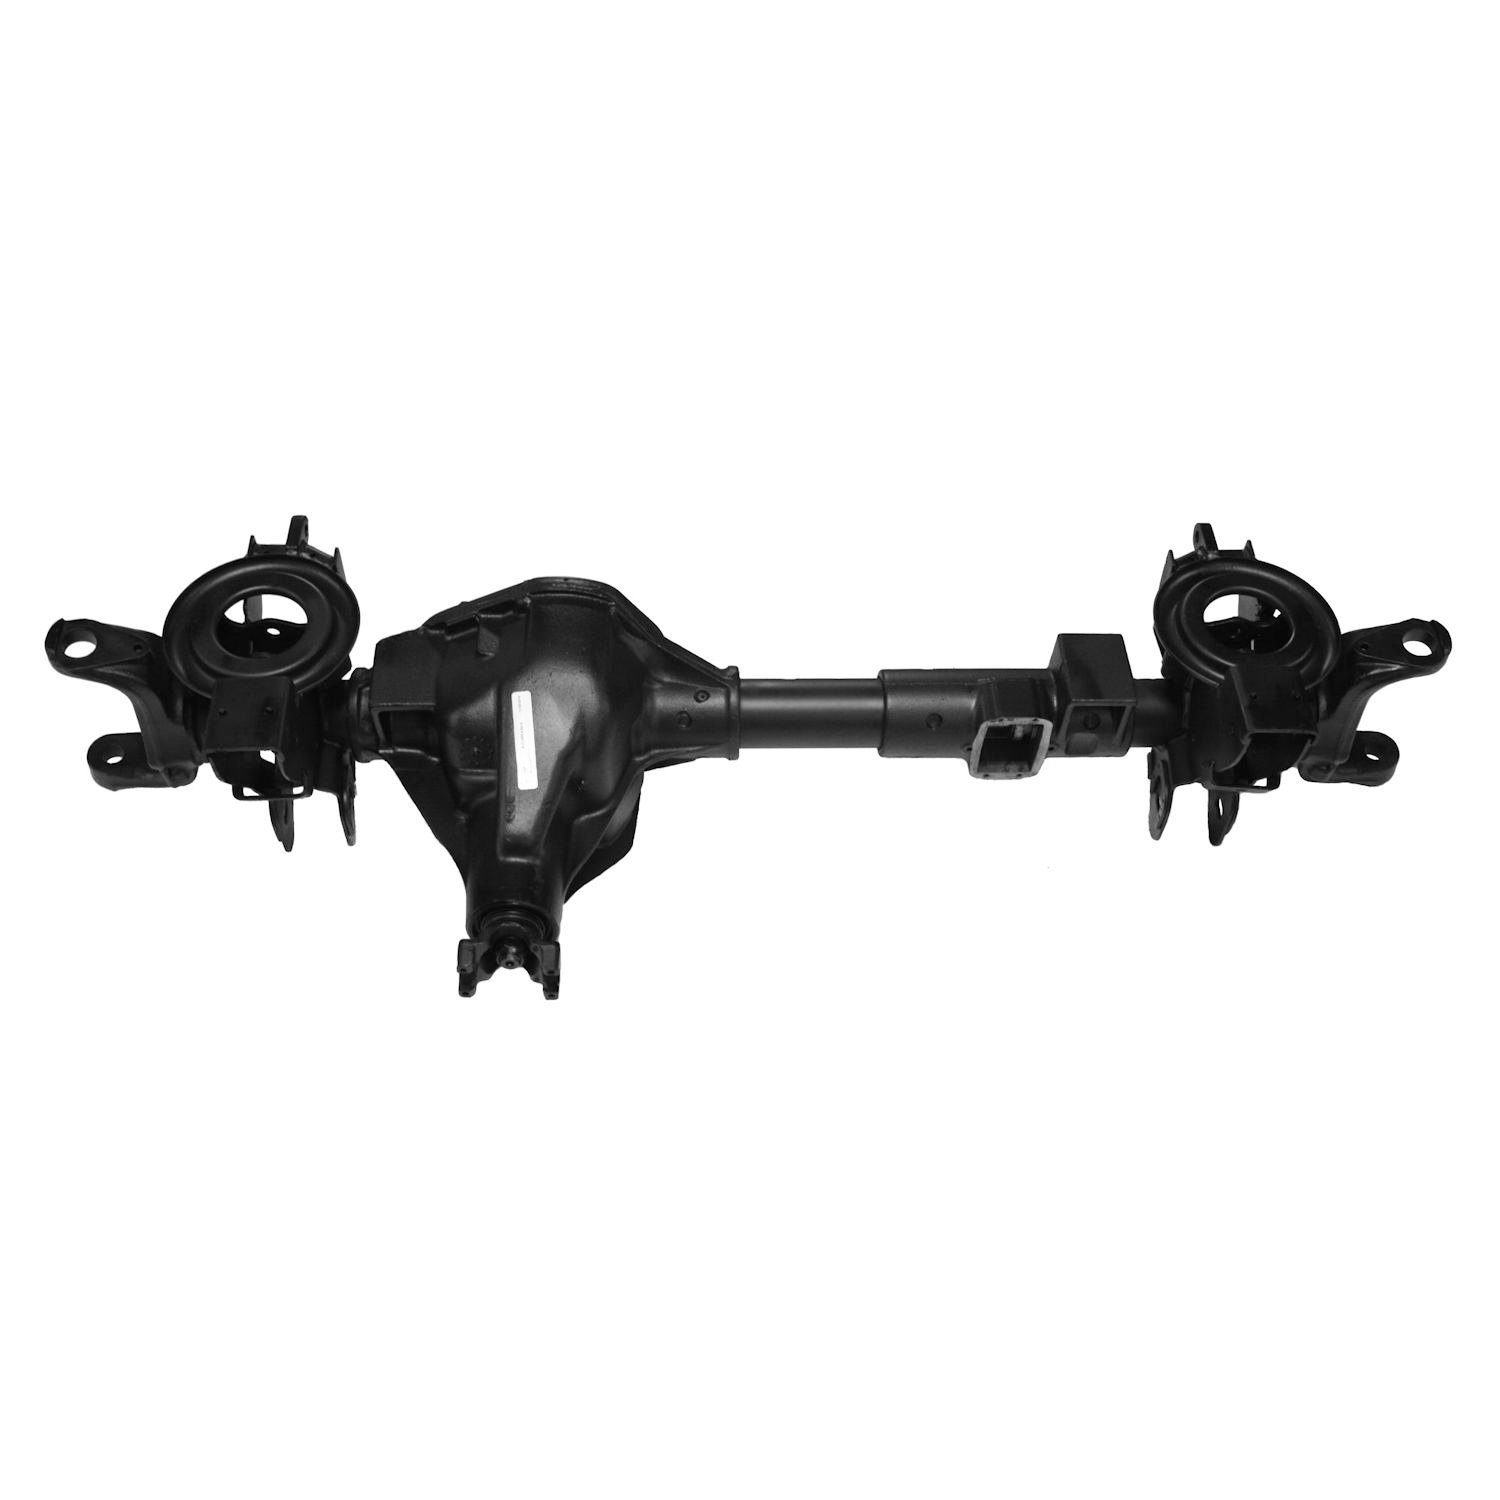 Remanufactured Complete Axle Assy for Dana 60 1998 Ram 2500 & 3500 4.11 with 4 Wheel ABS